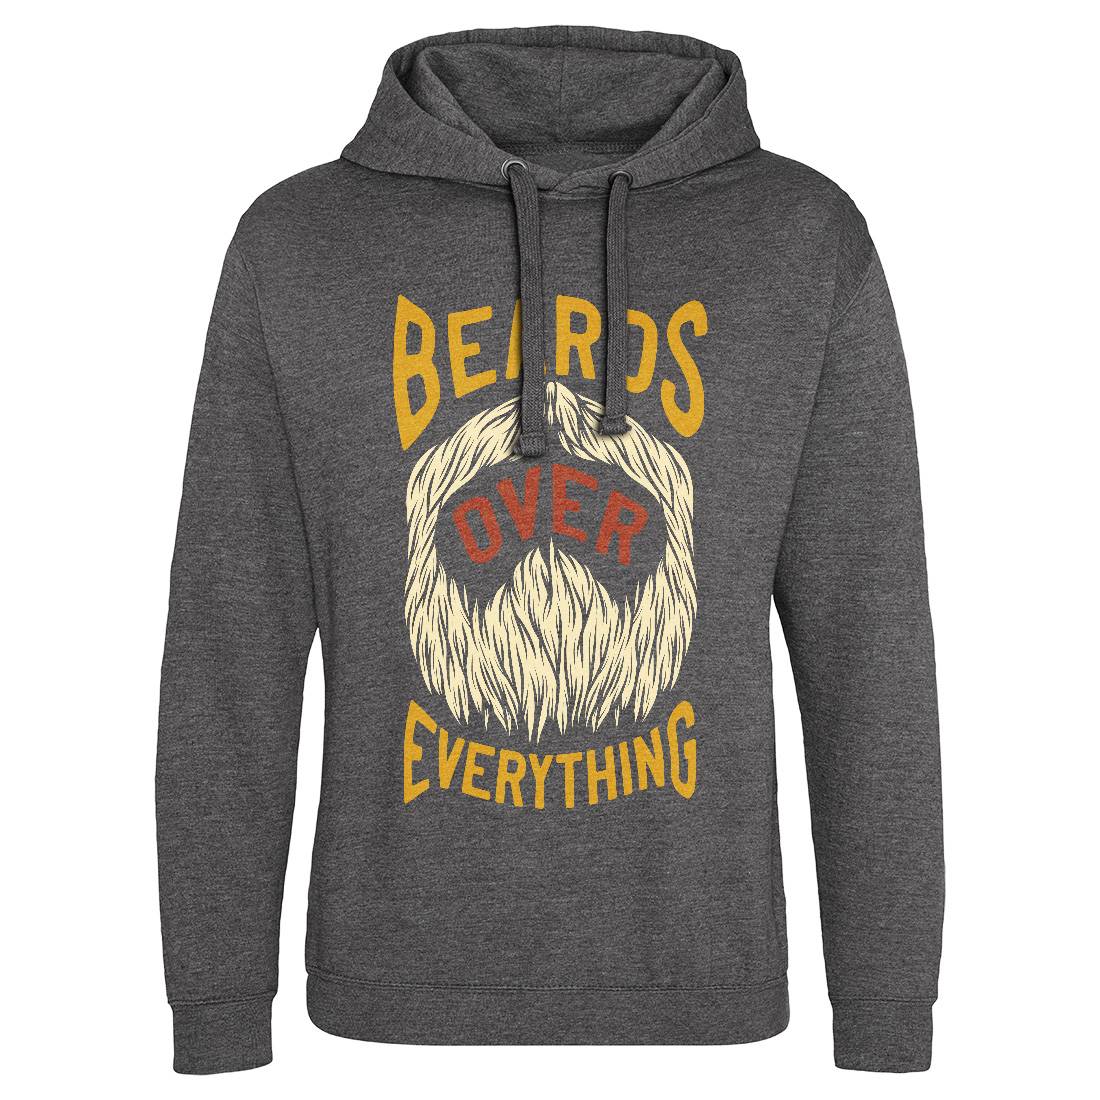 Beards Over Everything Mens Hoodie Without Pocket Barber C803